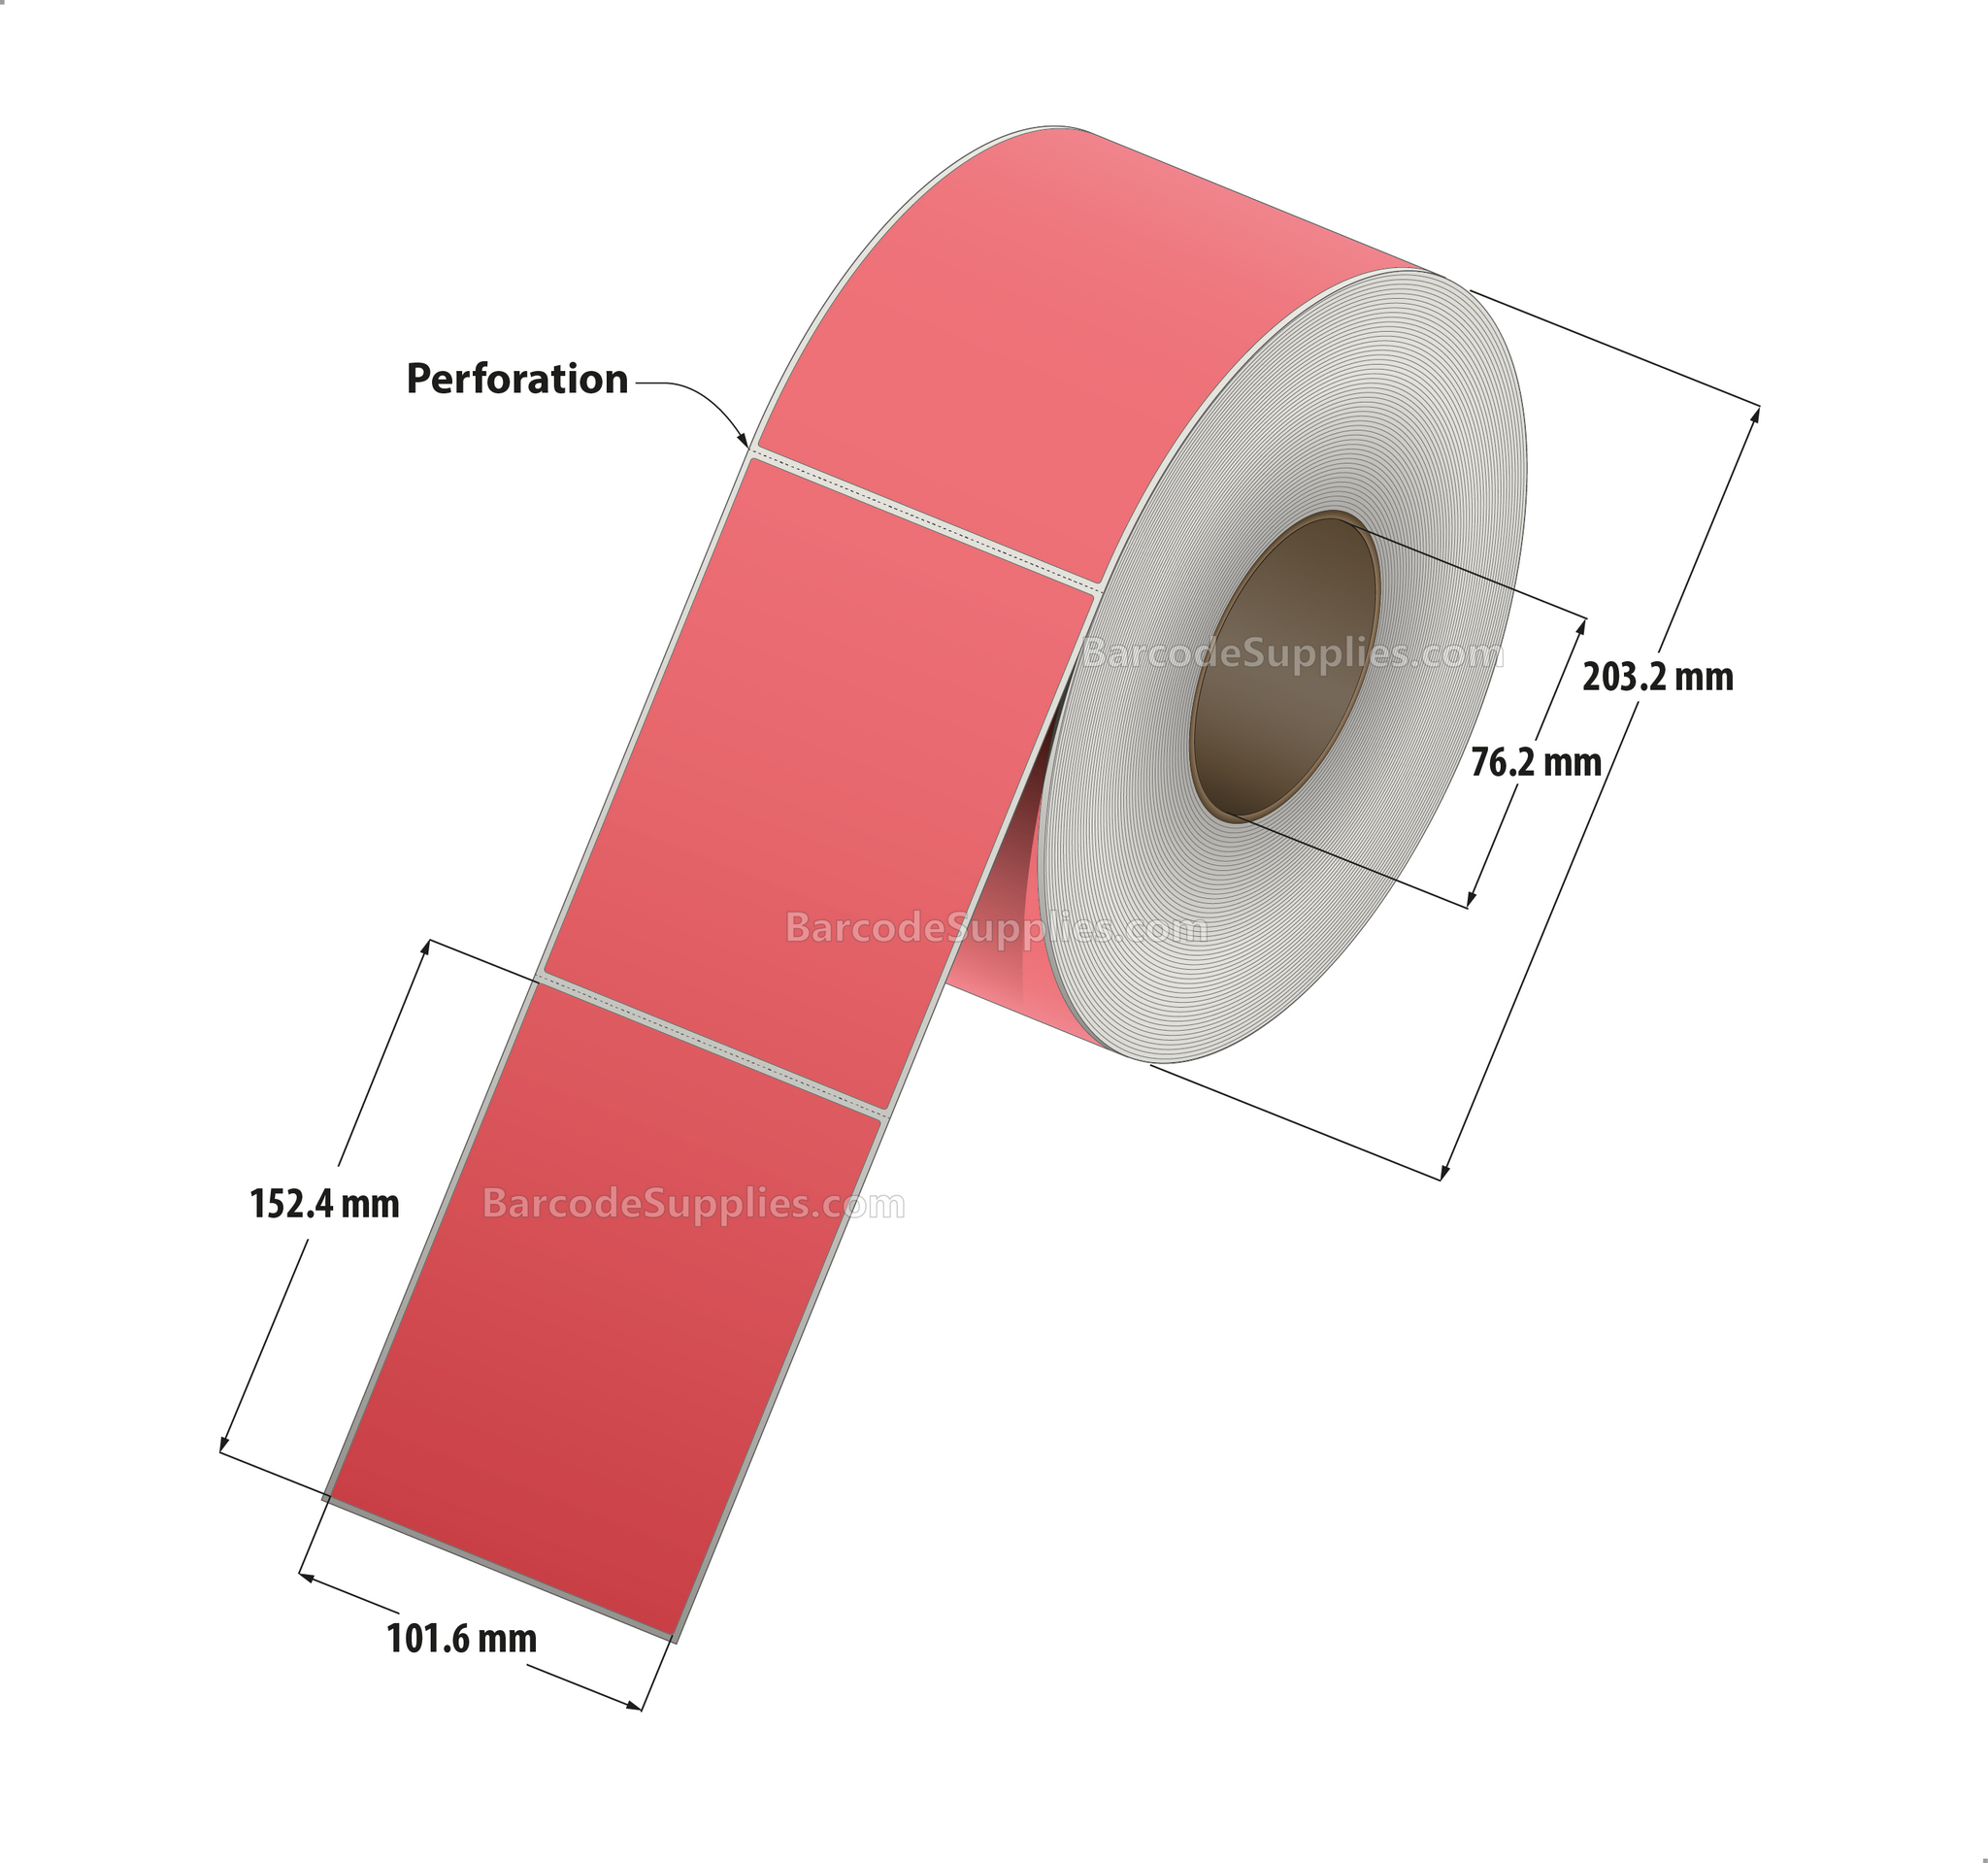 4 x 6 Thermal Transfer Fluorescent Red Labels With Permanent Acrylic Adhesive - Perforated - 1000 Labels Per Roll - Carton Of 4 Rolls - 4000 Labels Total - MPN: TH46-1PFR